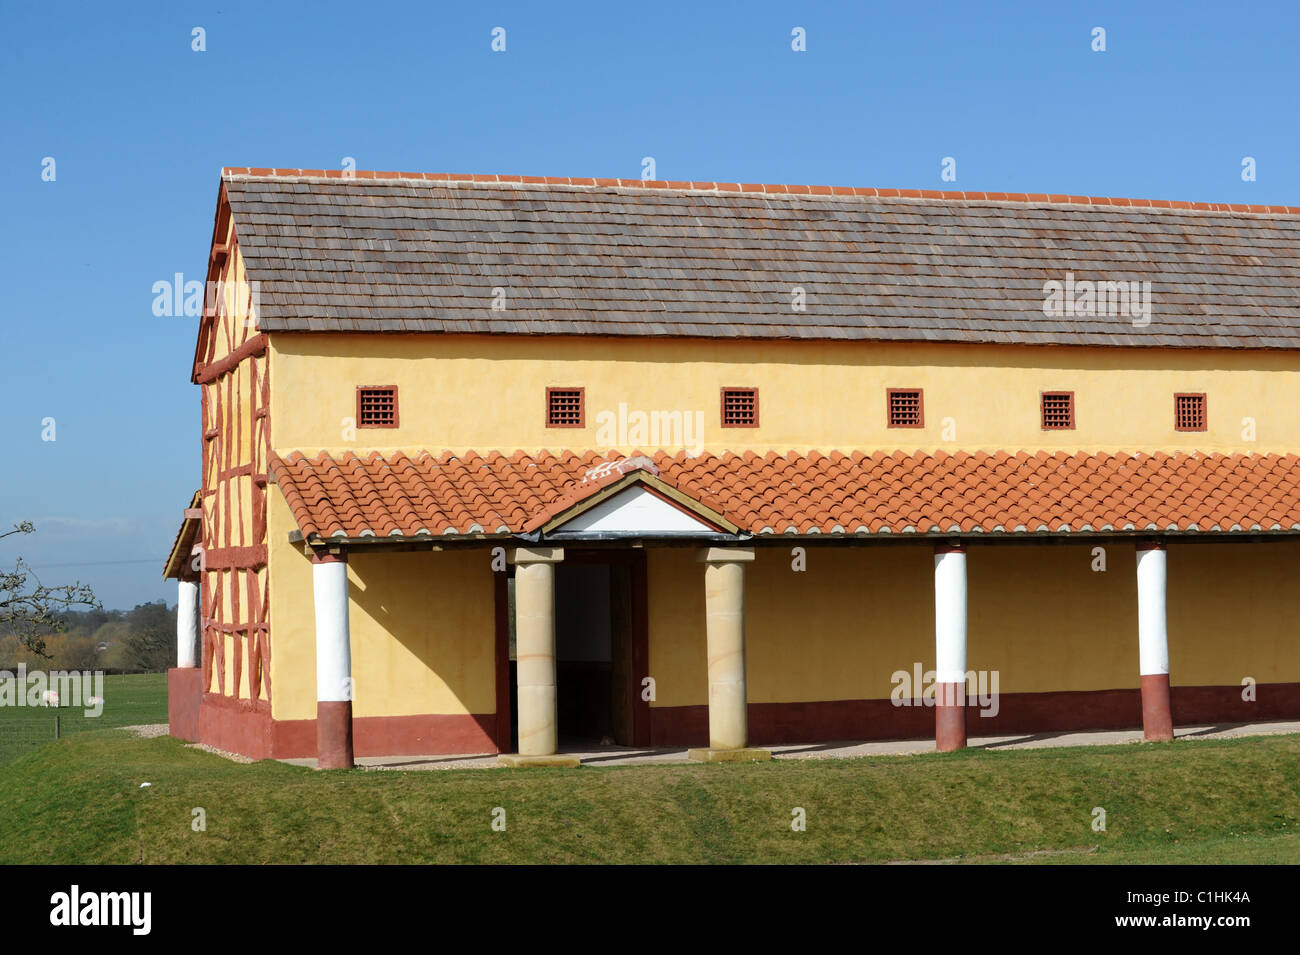 Wroxeter Replica Roman Town House built for TV show Stock Photo